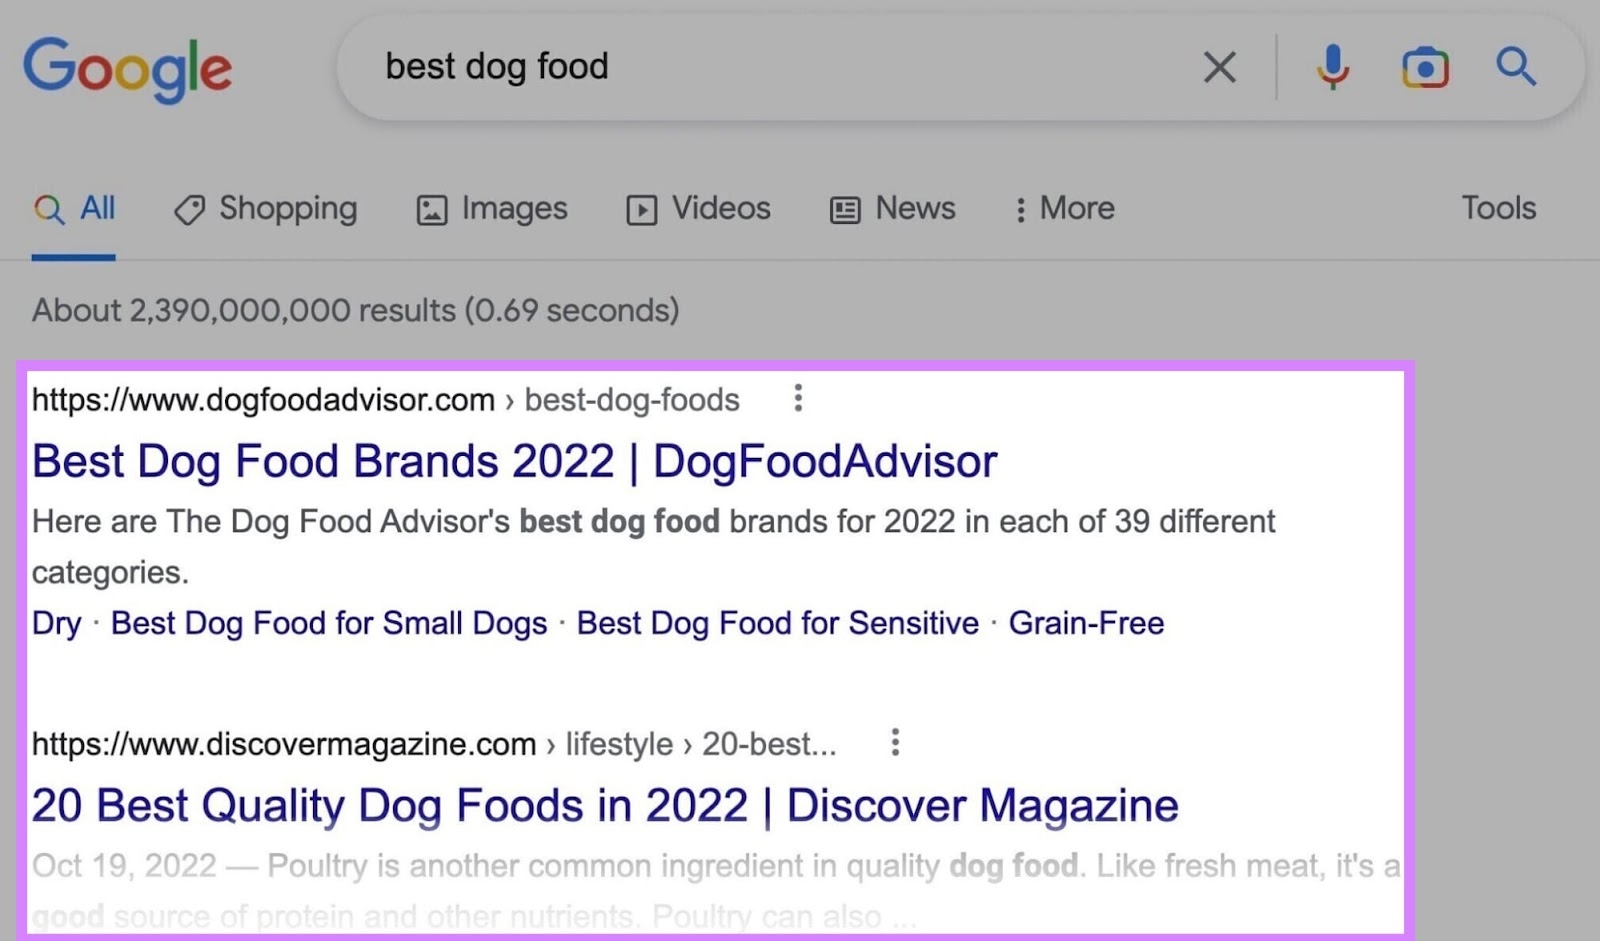 Google's search results for "best dog food"